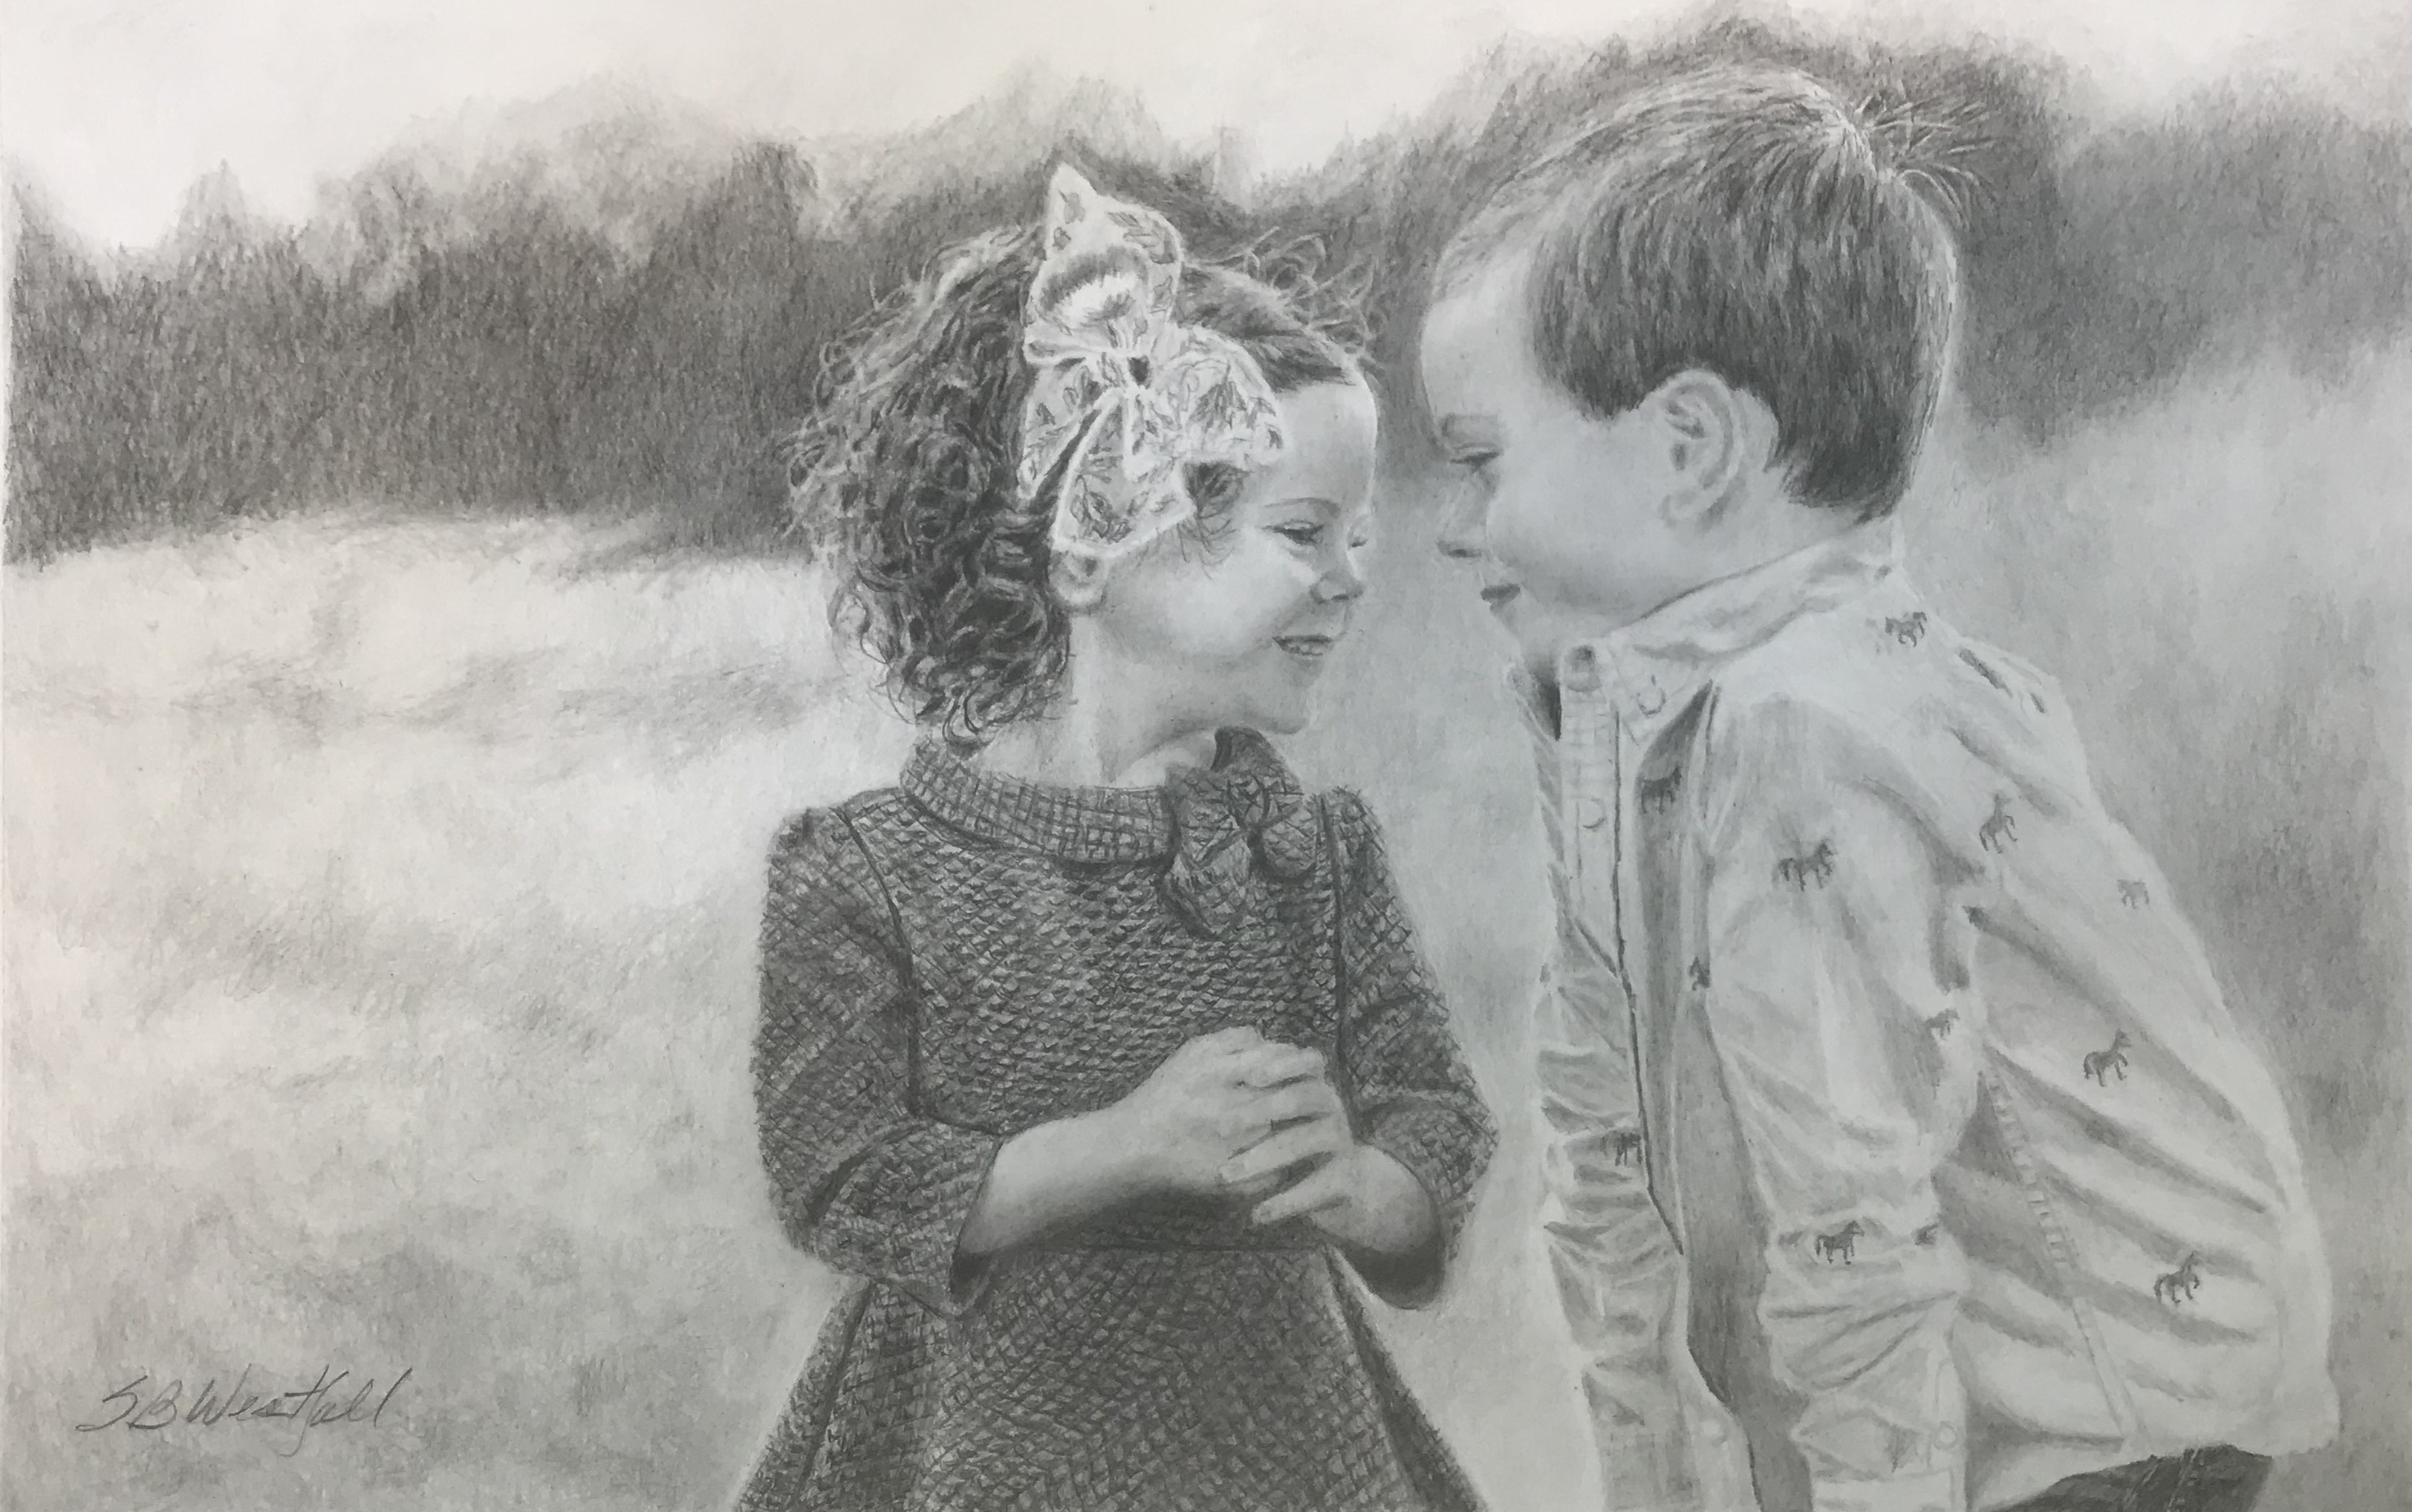 Graphite drawing of a young girl, testimonial from student, Susan Westfall of RL Caldwell Studio